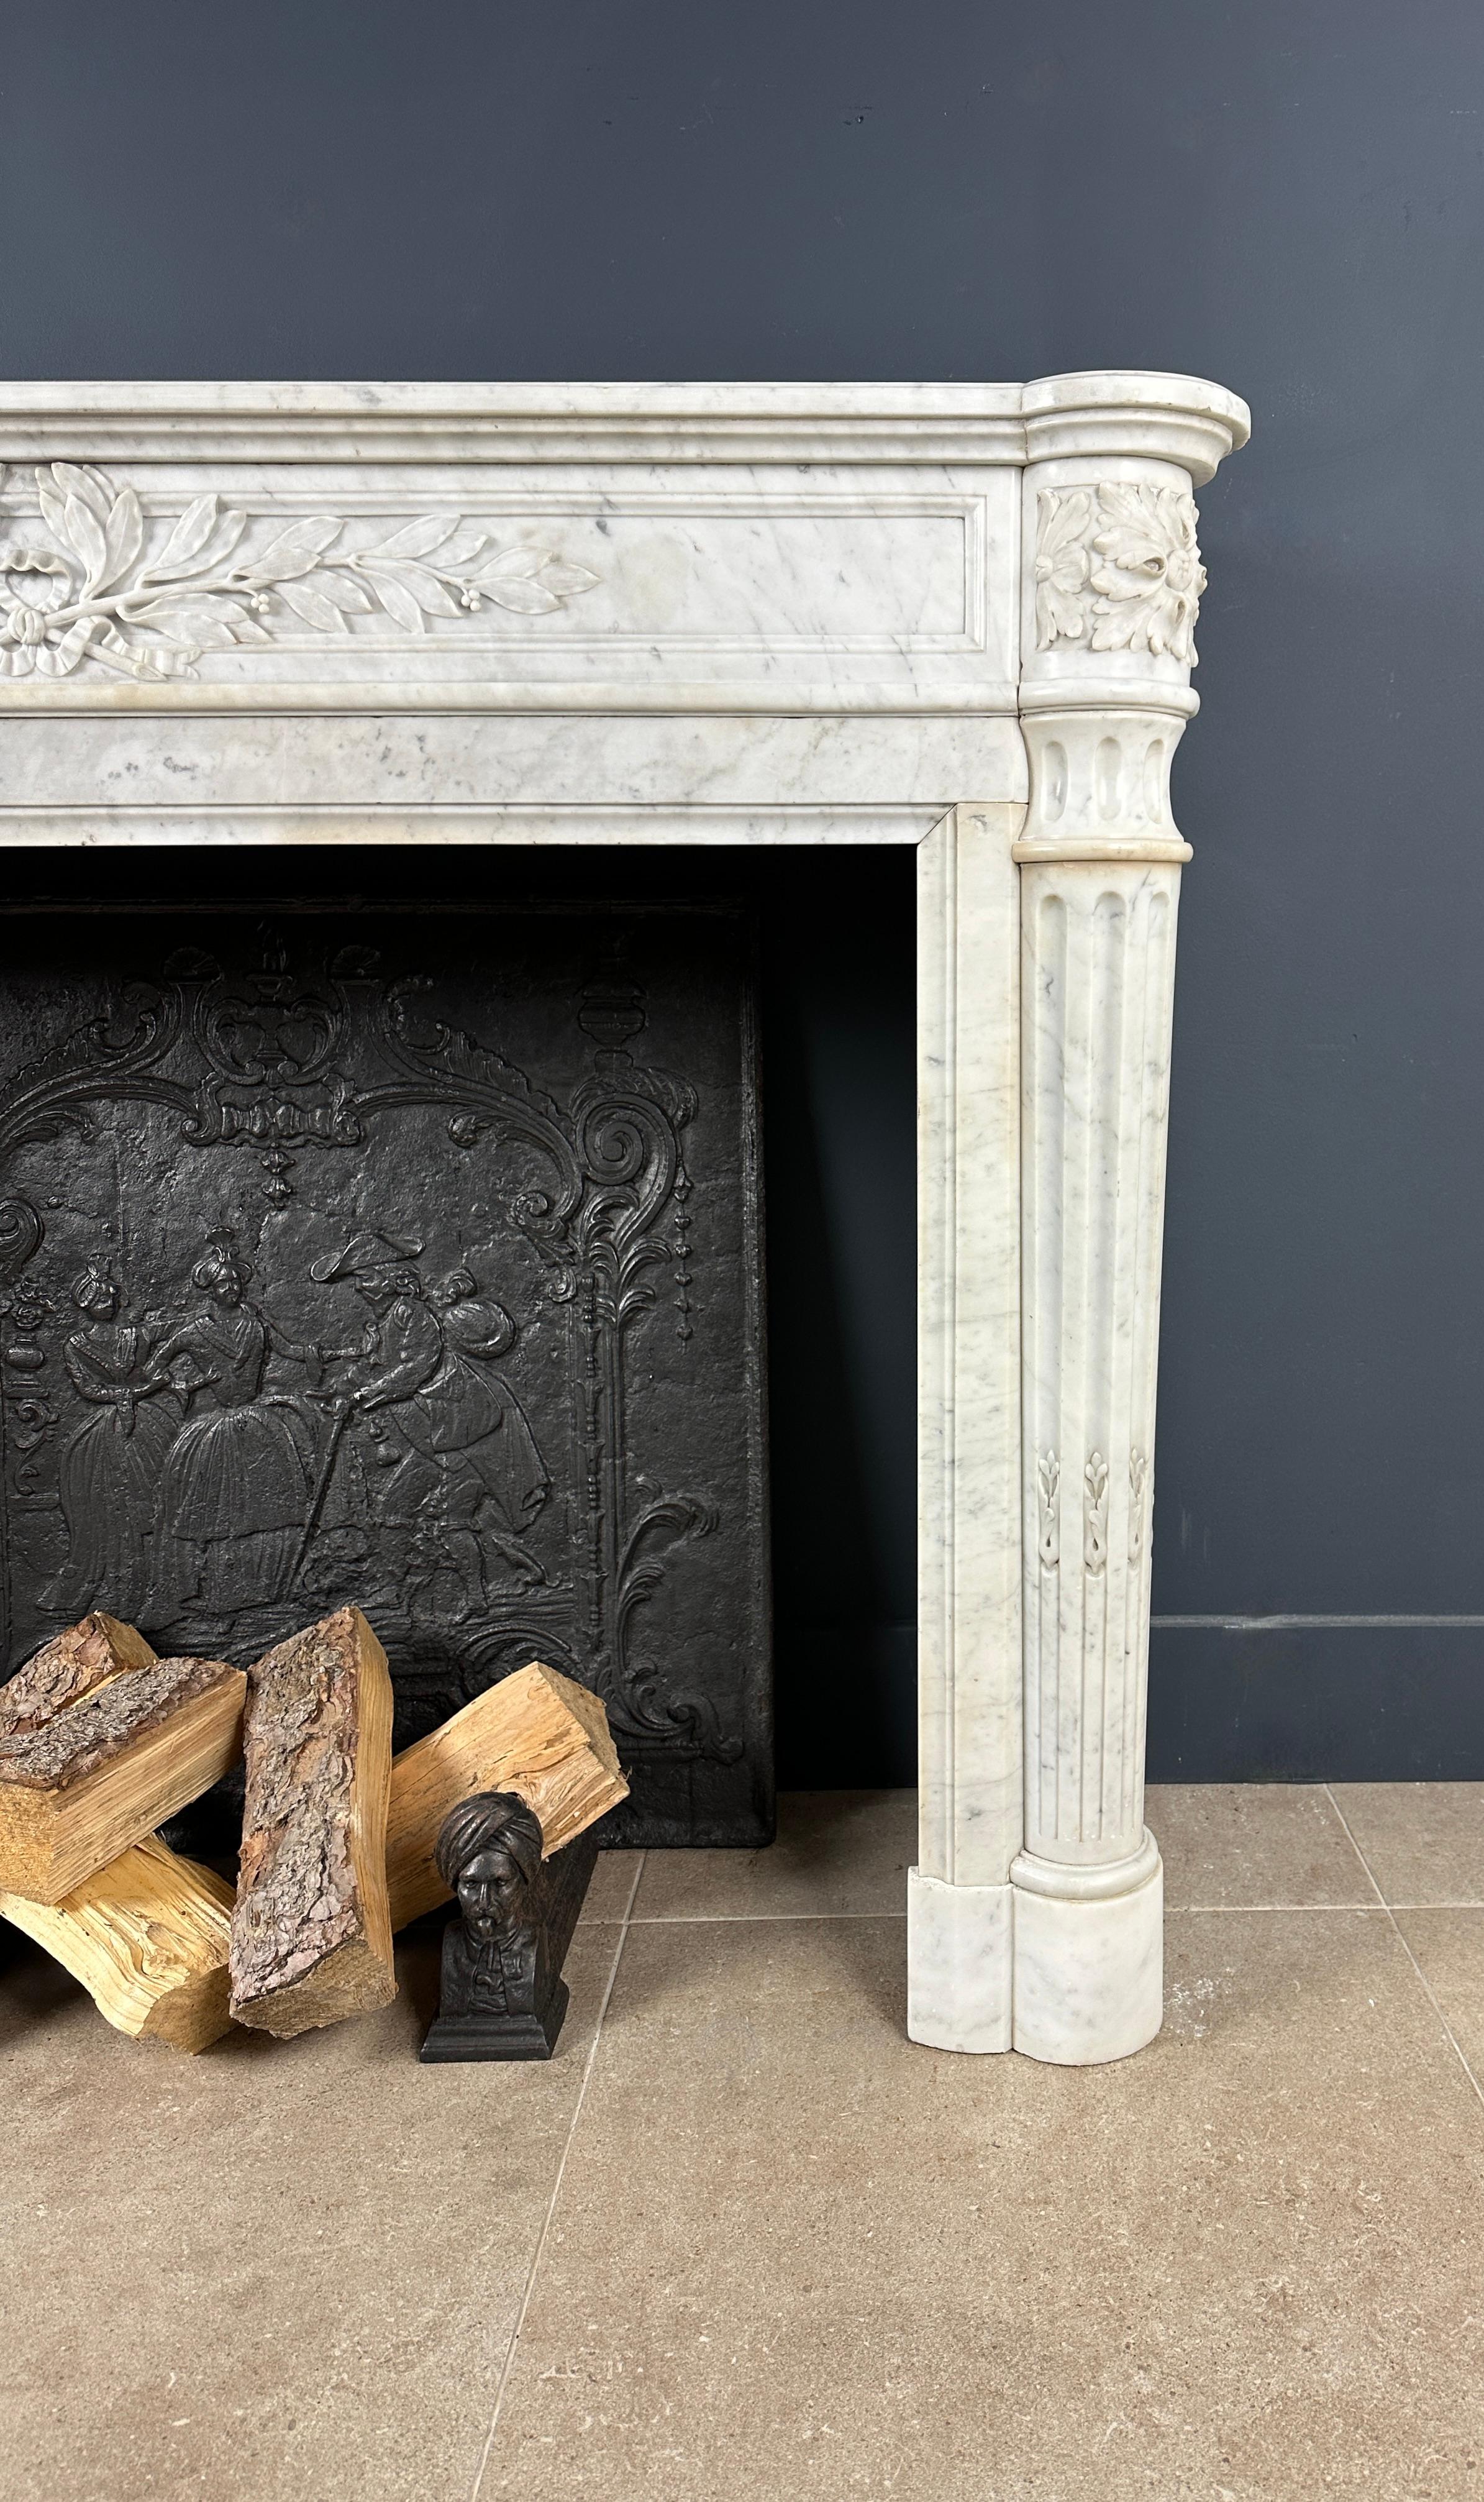 Discover the opulence of the Unique Marble French Fireplace from the Opéra Garnier in Paris, crafted with exquisite Carrara marble and infused with the refinement of the Luise XVI style. The beautiful detail in the front catches your attention